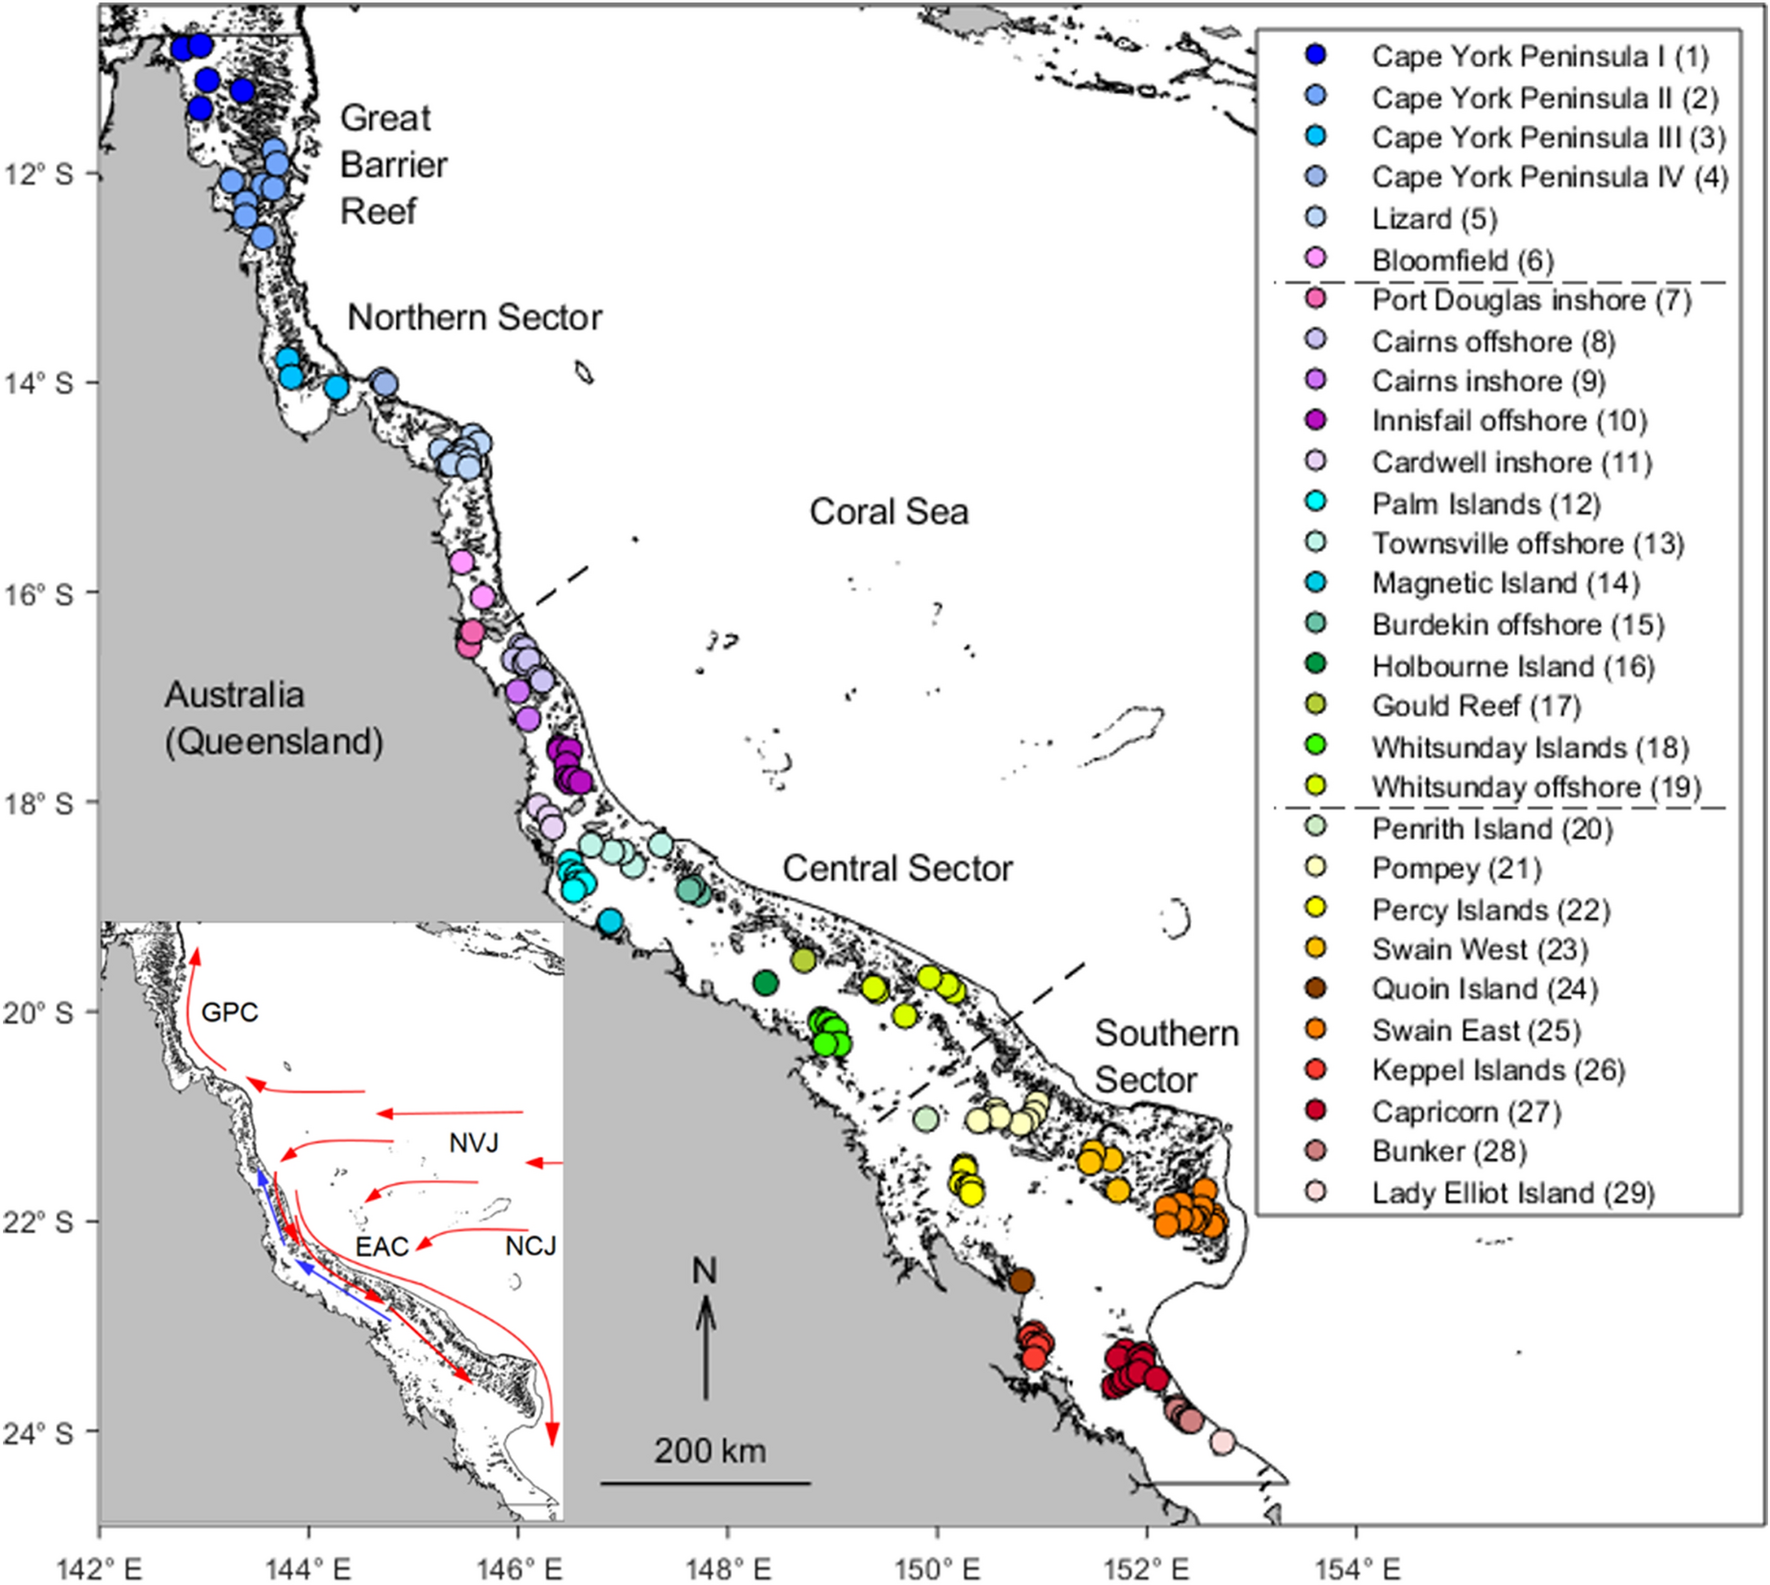 The El Niño Southern Oscillation drives multidirectional inter-reef larval  connectivity in the Great Barrier Reef | Scientific Reports